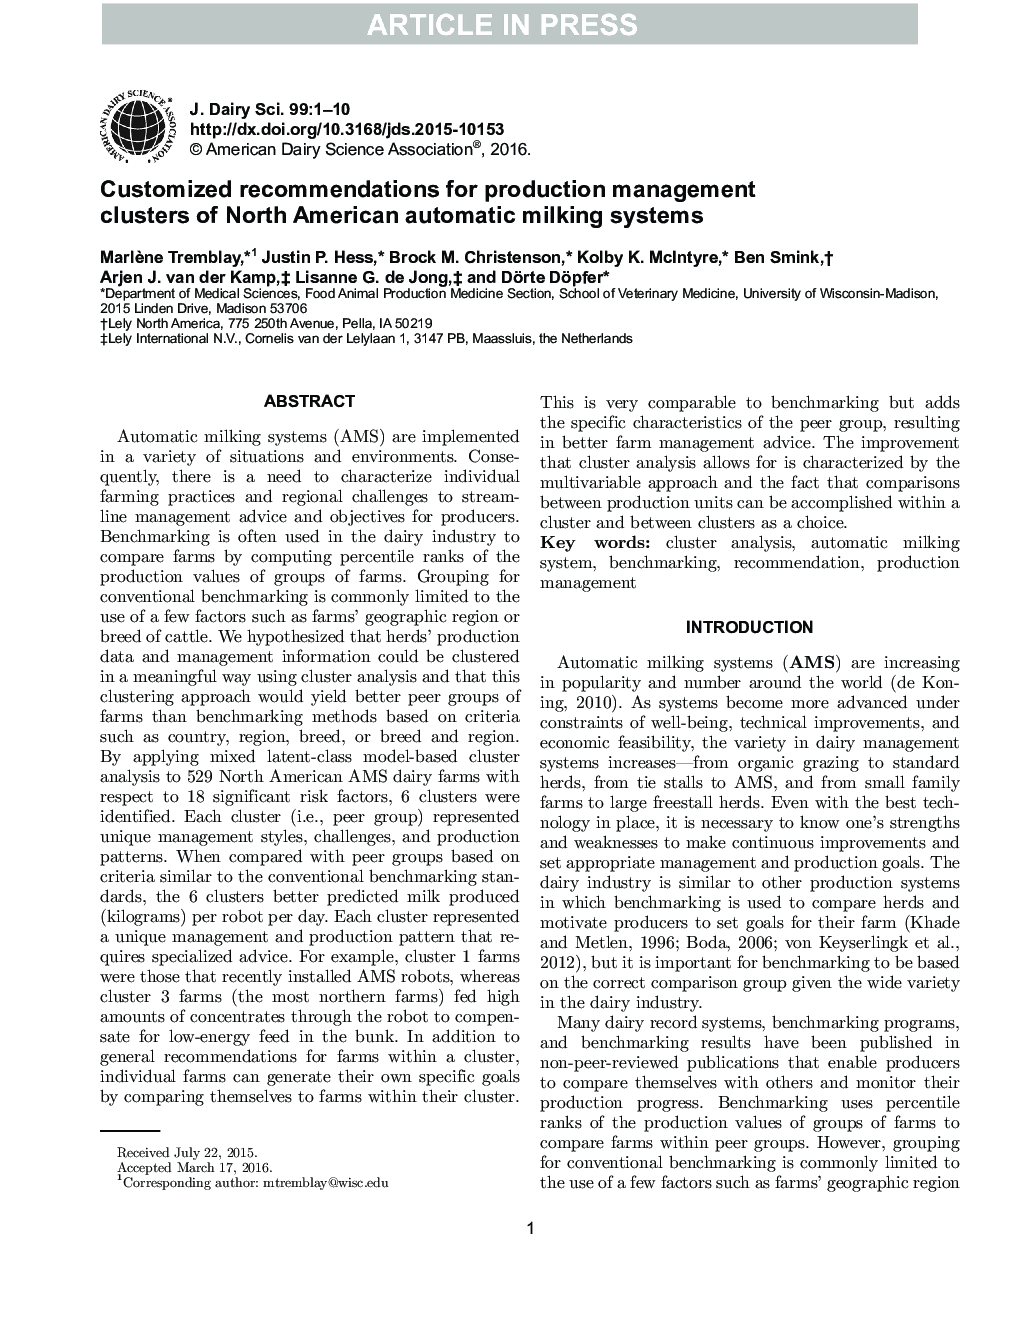 Customized recommendations for production management clusters of North American automatic milking systems